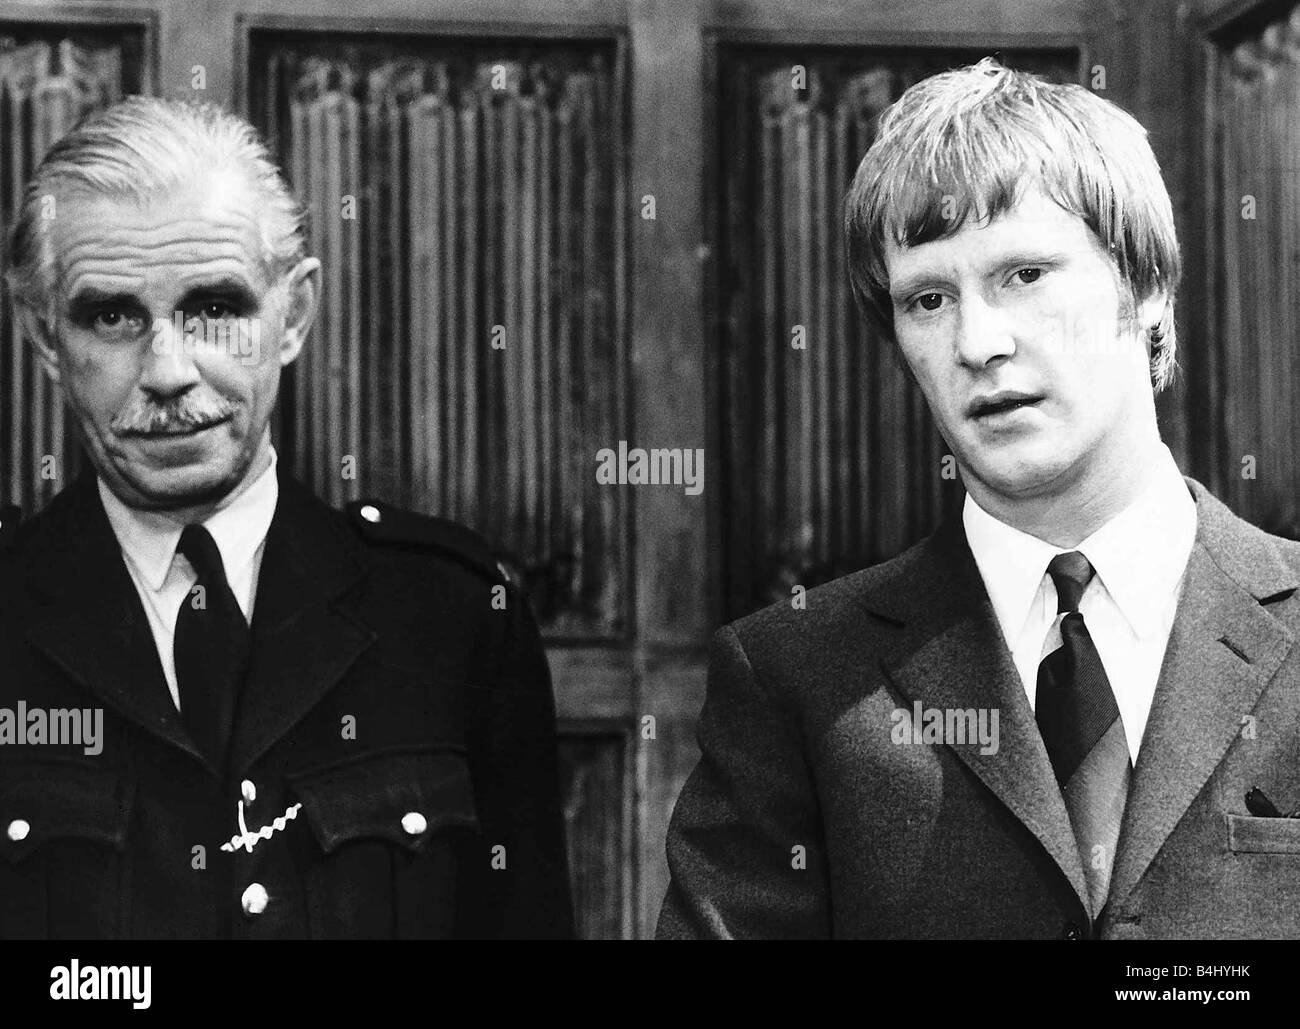 Dennis Waterman actor on trial for the murder of his father in scene from Metro Goldwyn Mayer film Hush A Bye directed by John Newlands Stock Photo